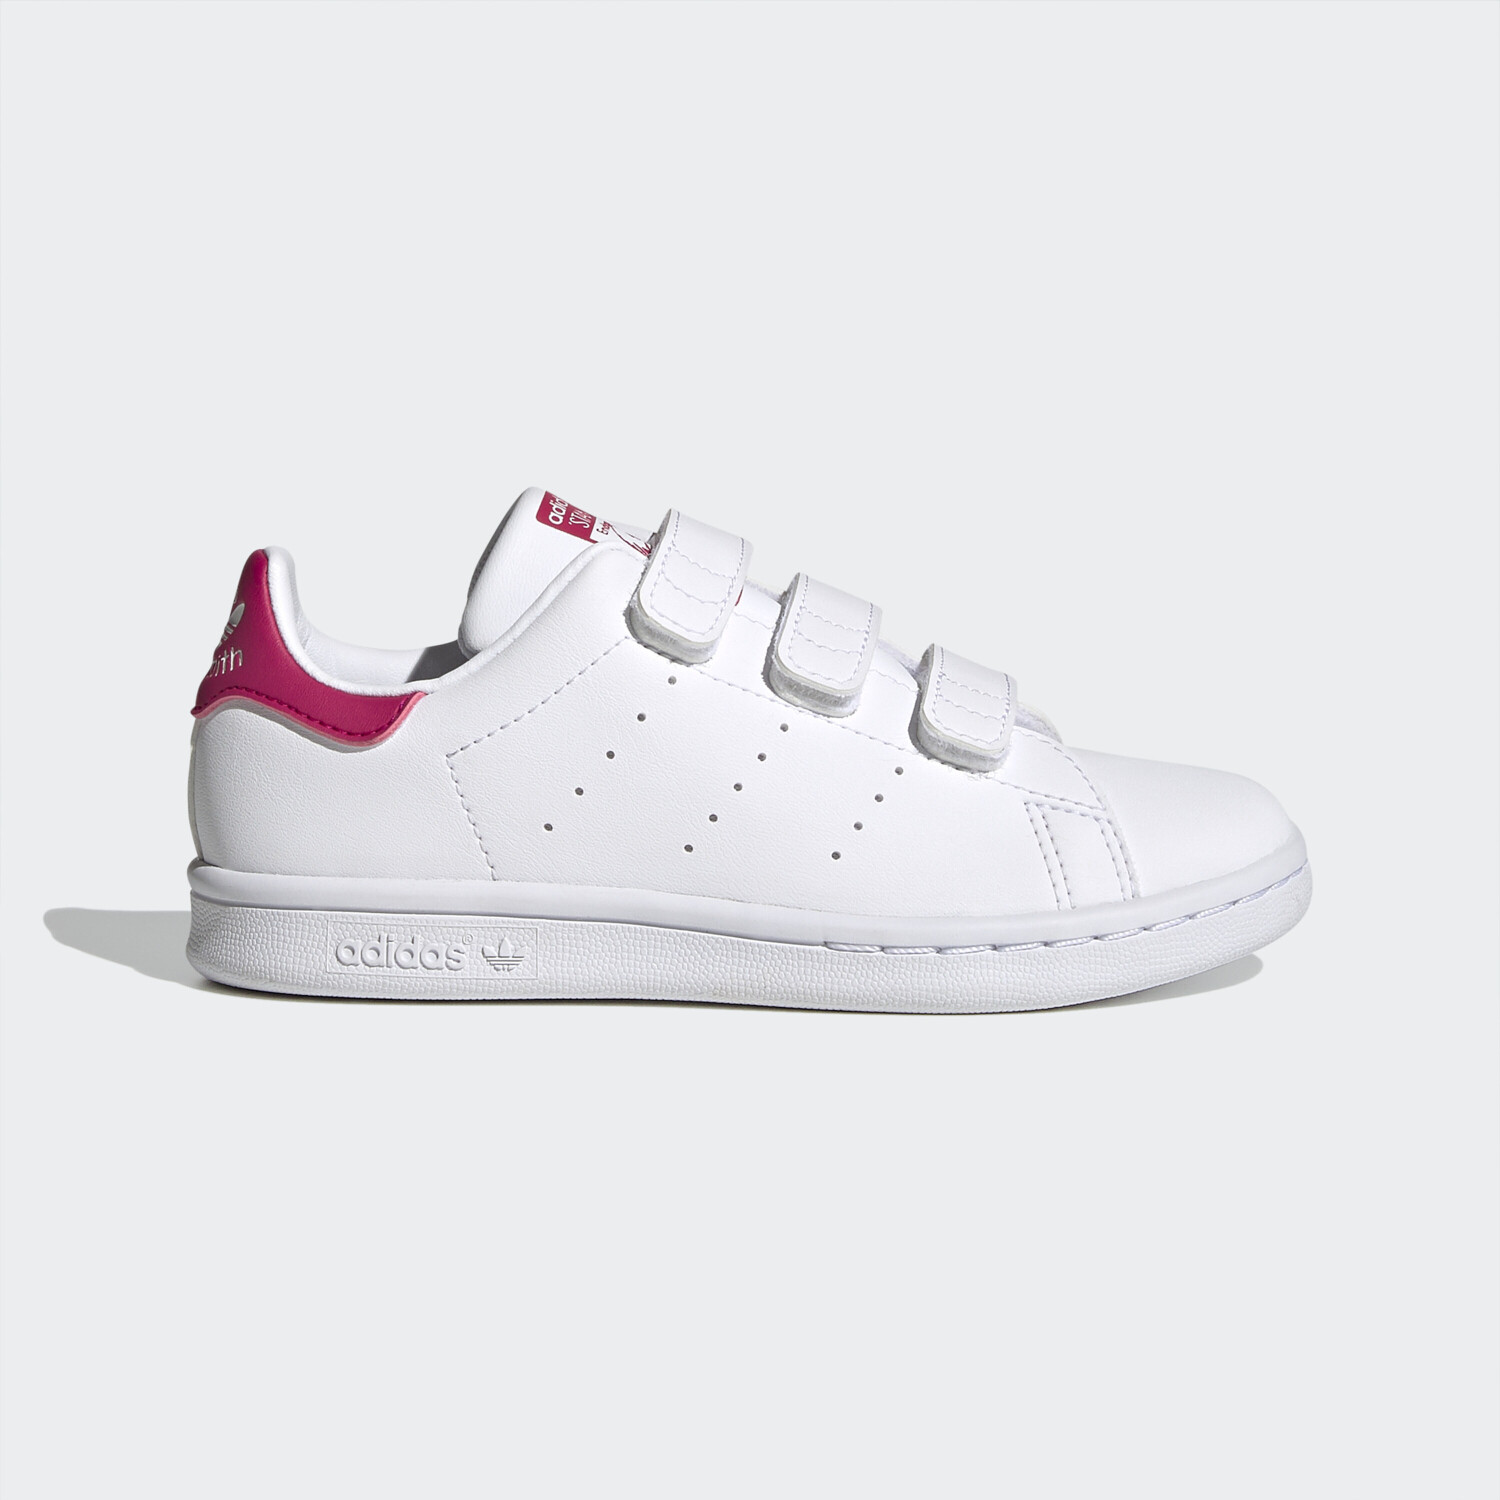 Stan Smith Pink Adidas White/Bold Kinder Deals Buy Cloud – £32.50 from Best White/Cloud on (Today)